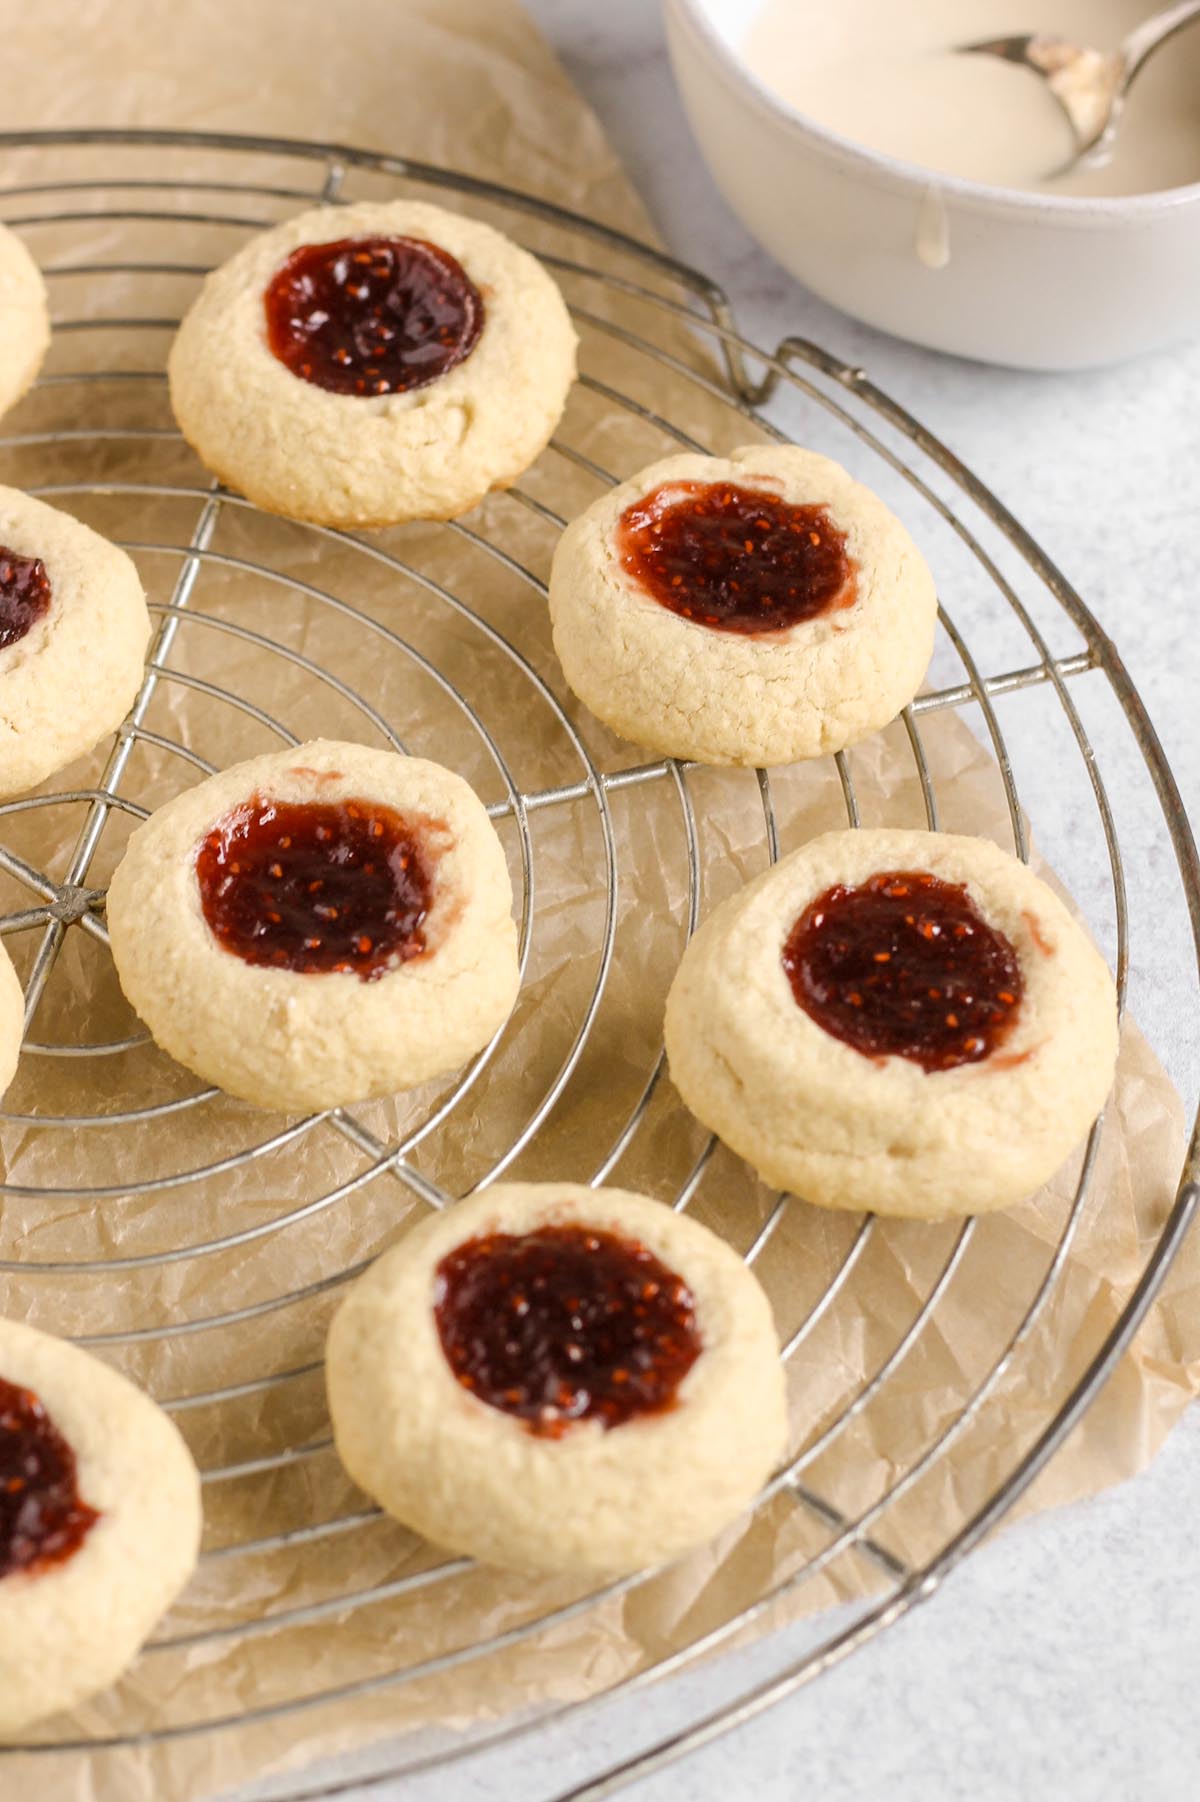 Baked thumbprint cookies on a wire cooling rack.